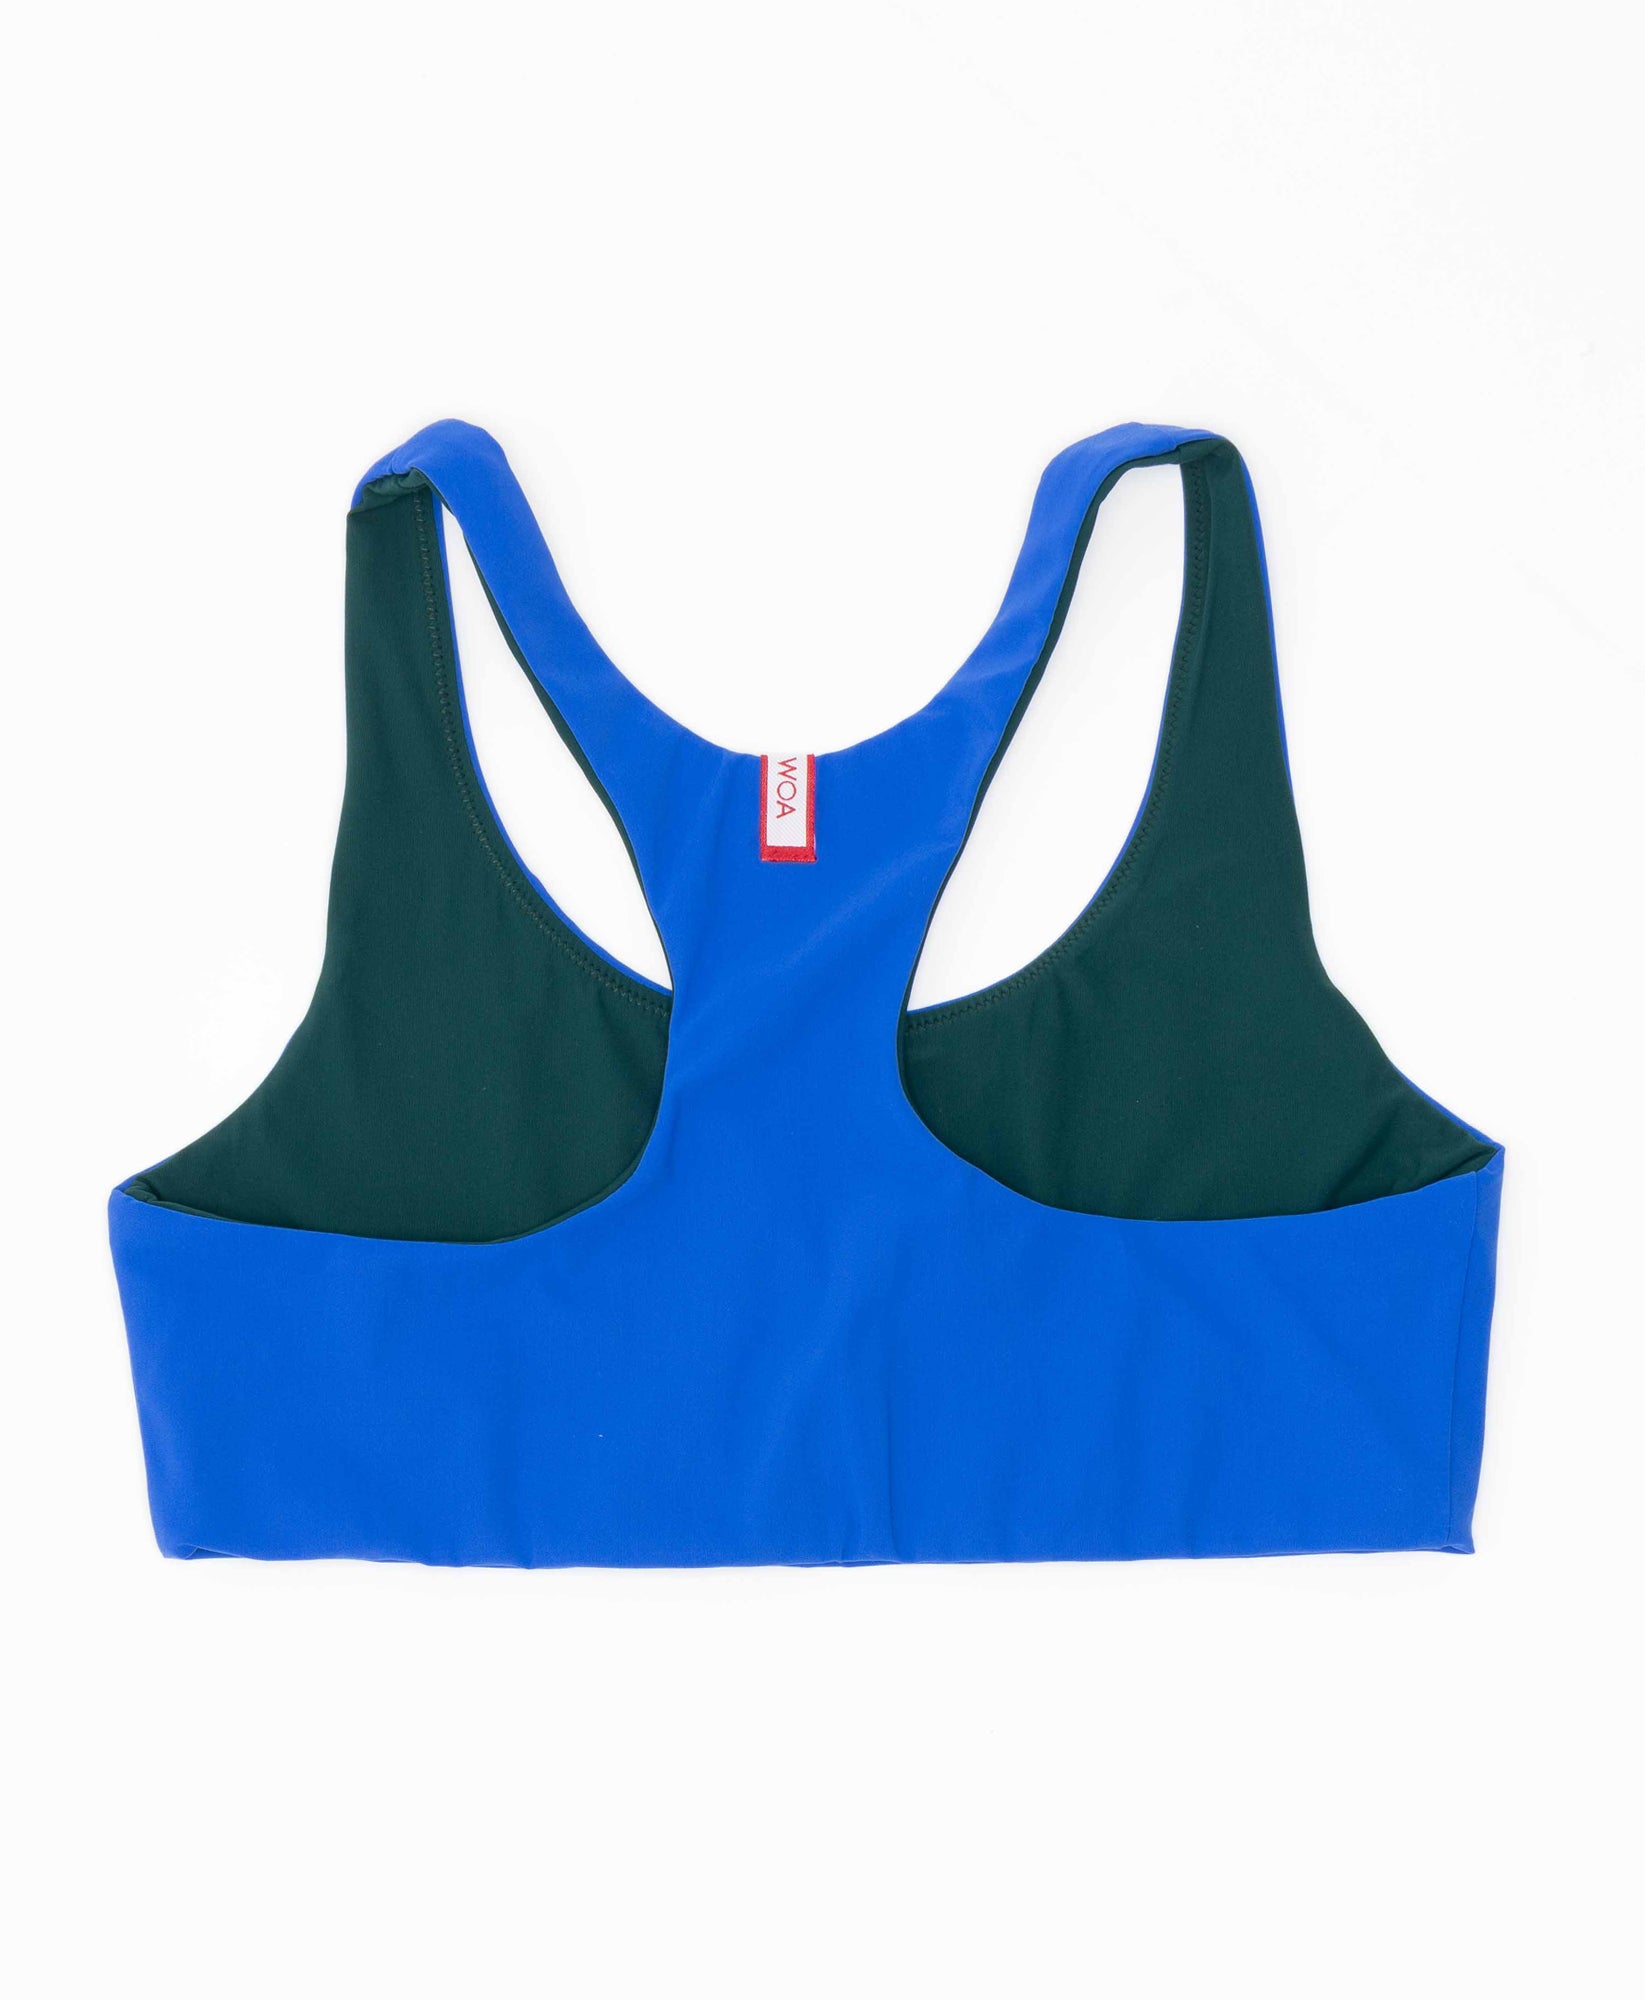 Wear One's At Race You Back Bra in Revive Blue Flat Back